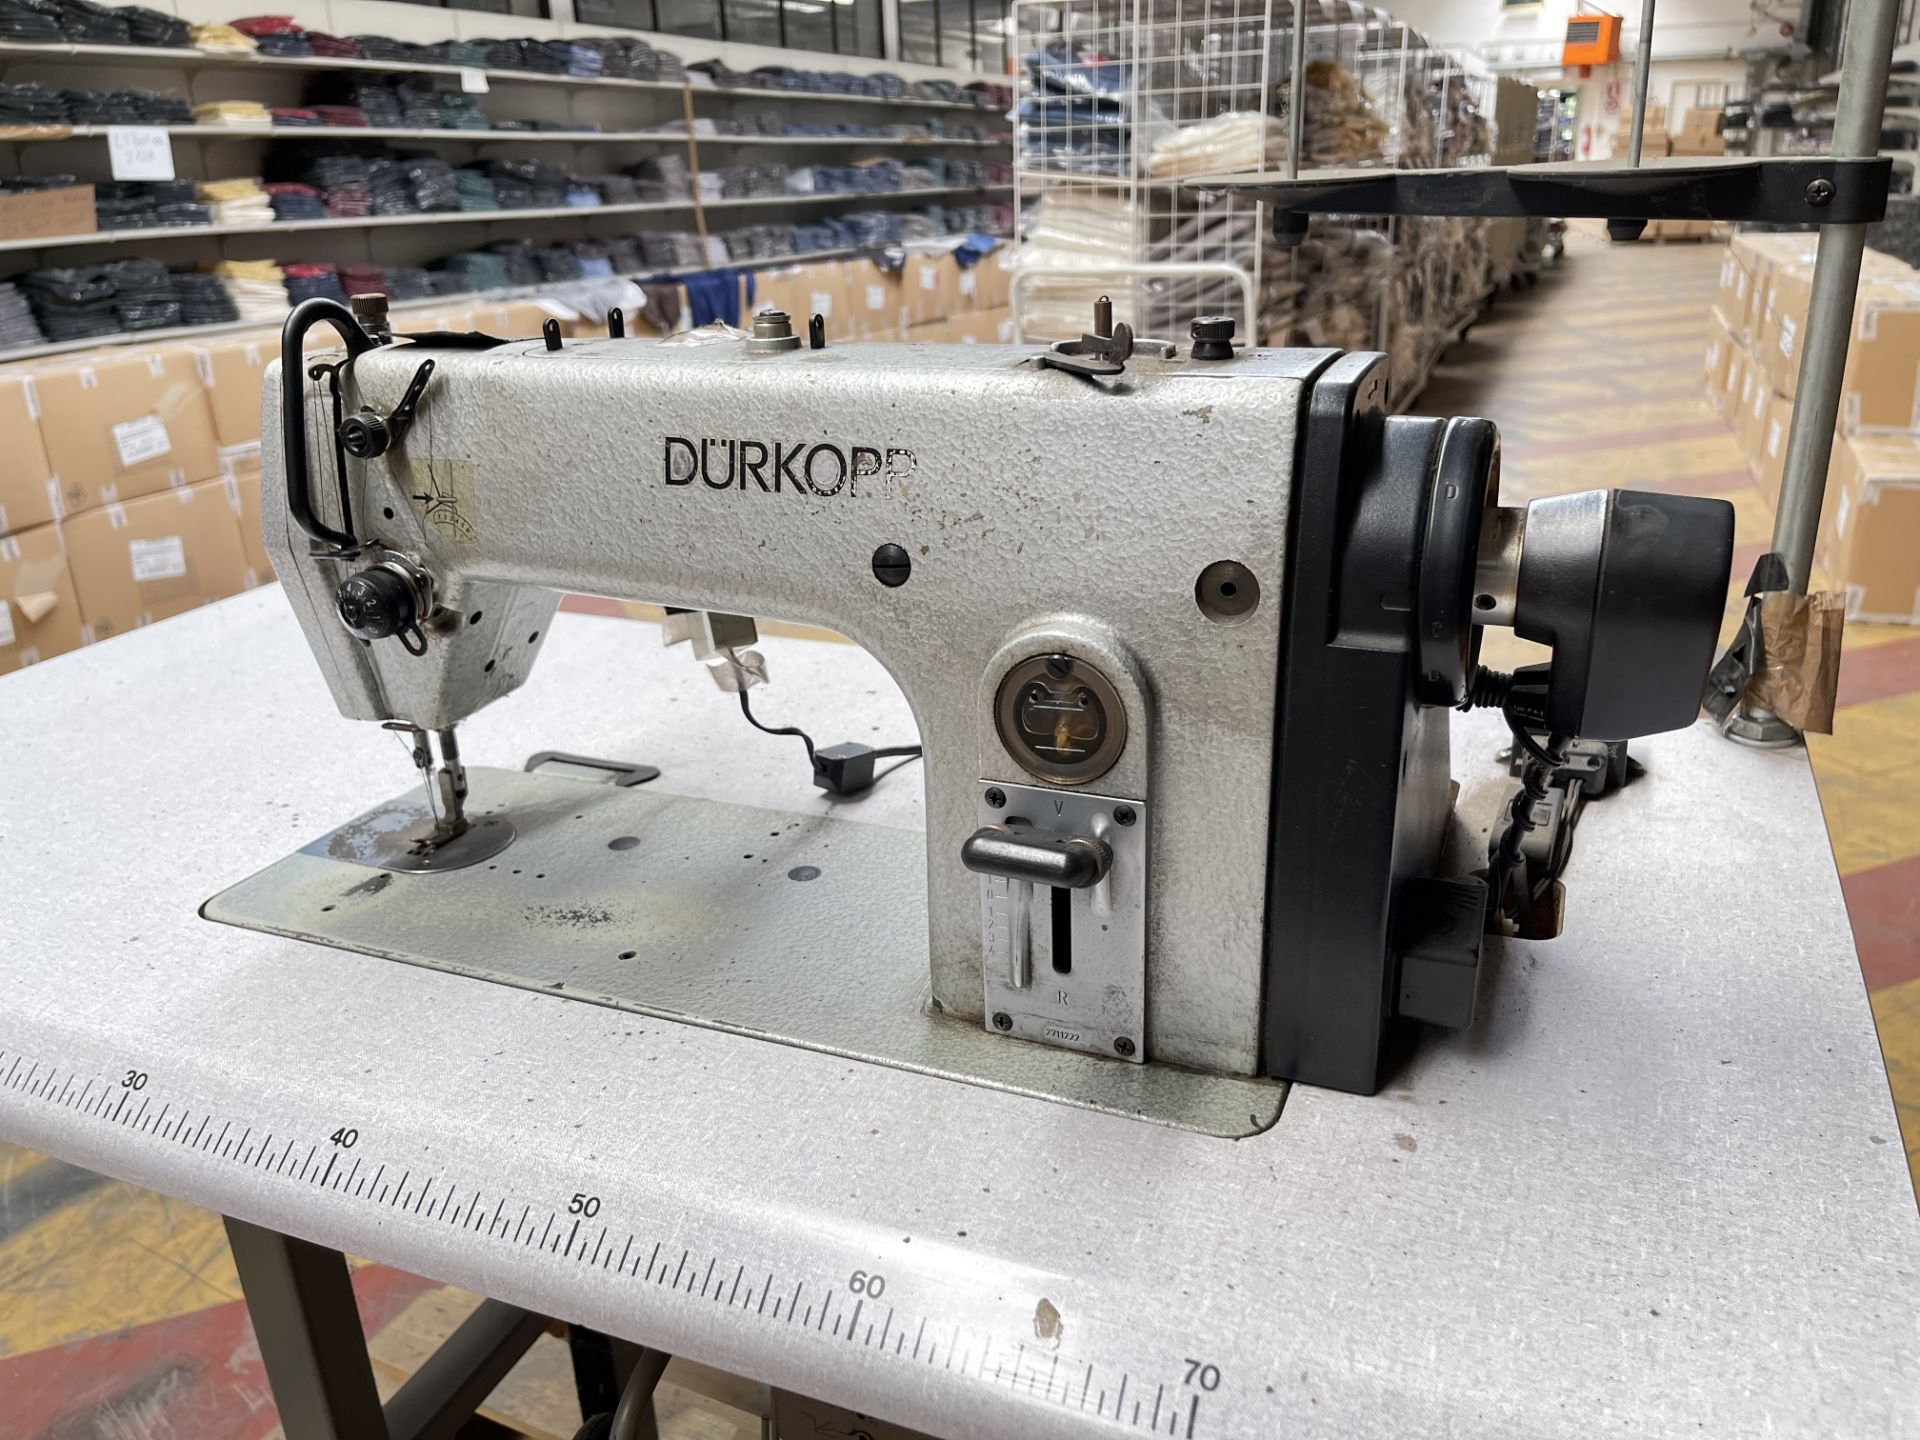 Durkopp 271-140041 Industrial Sewing machine. Needle 797/80 - Image 5 of 9